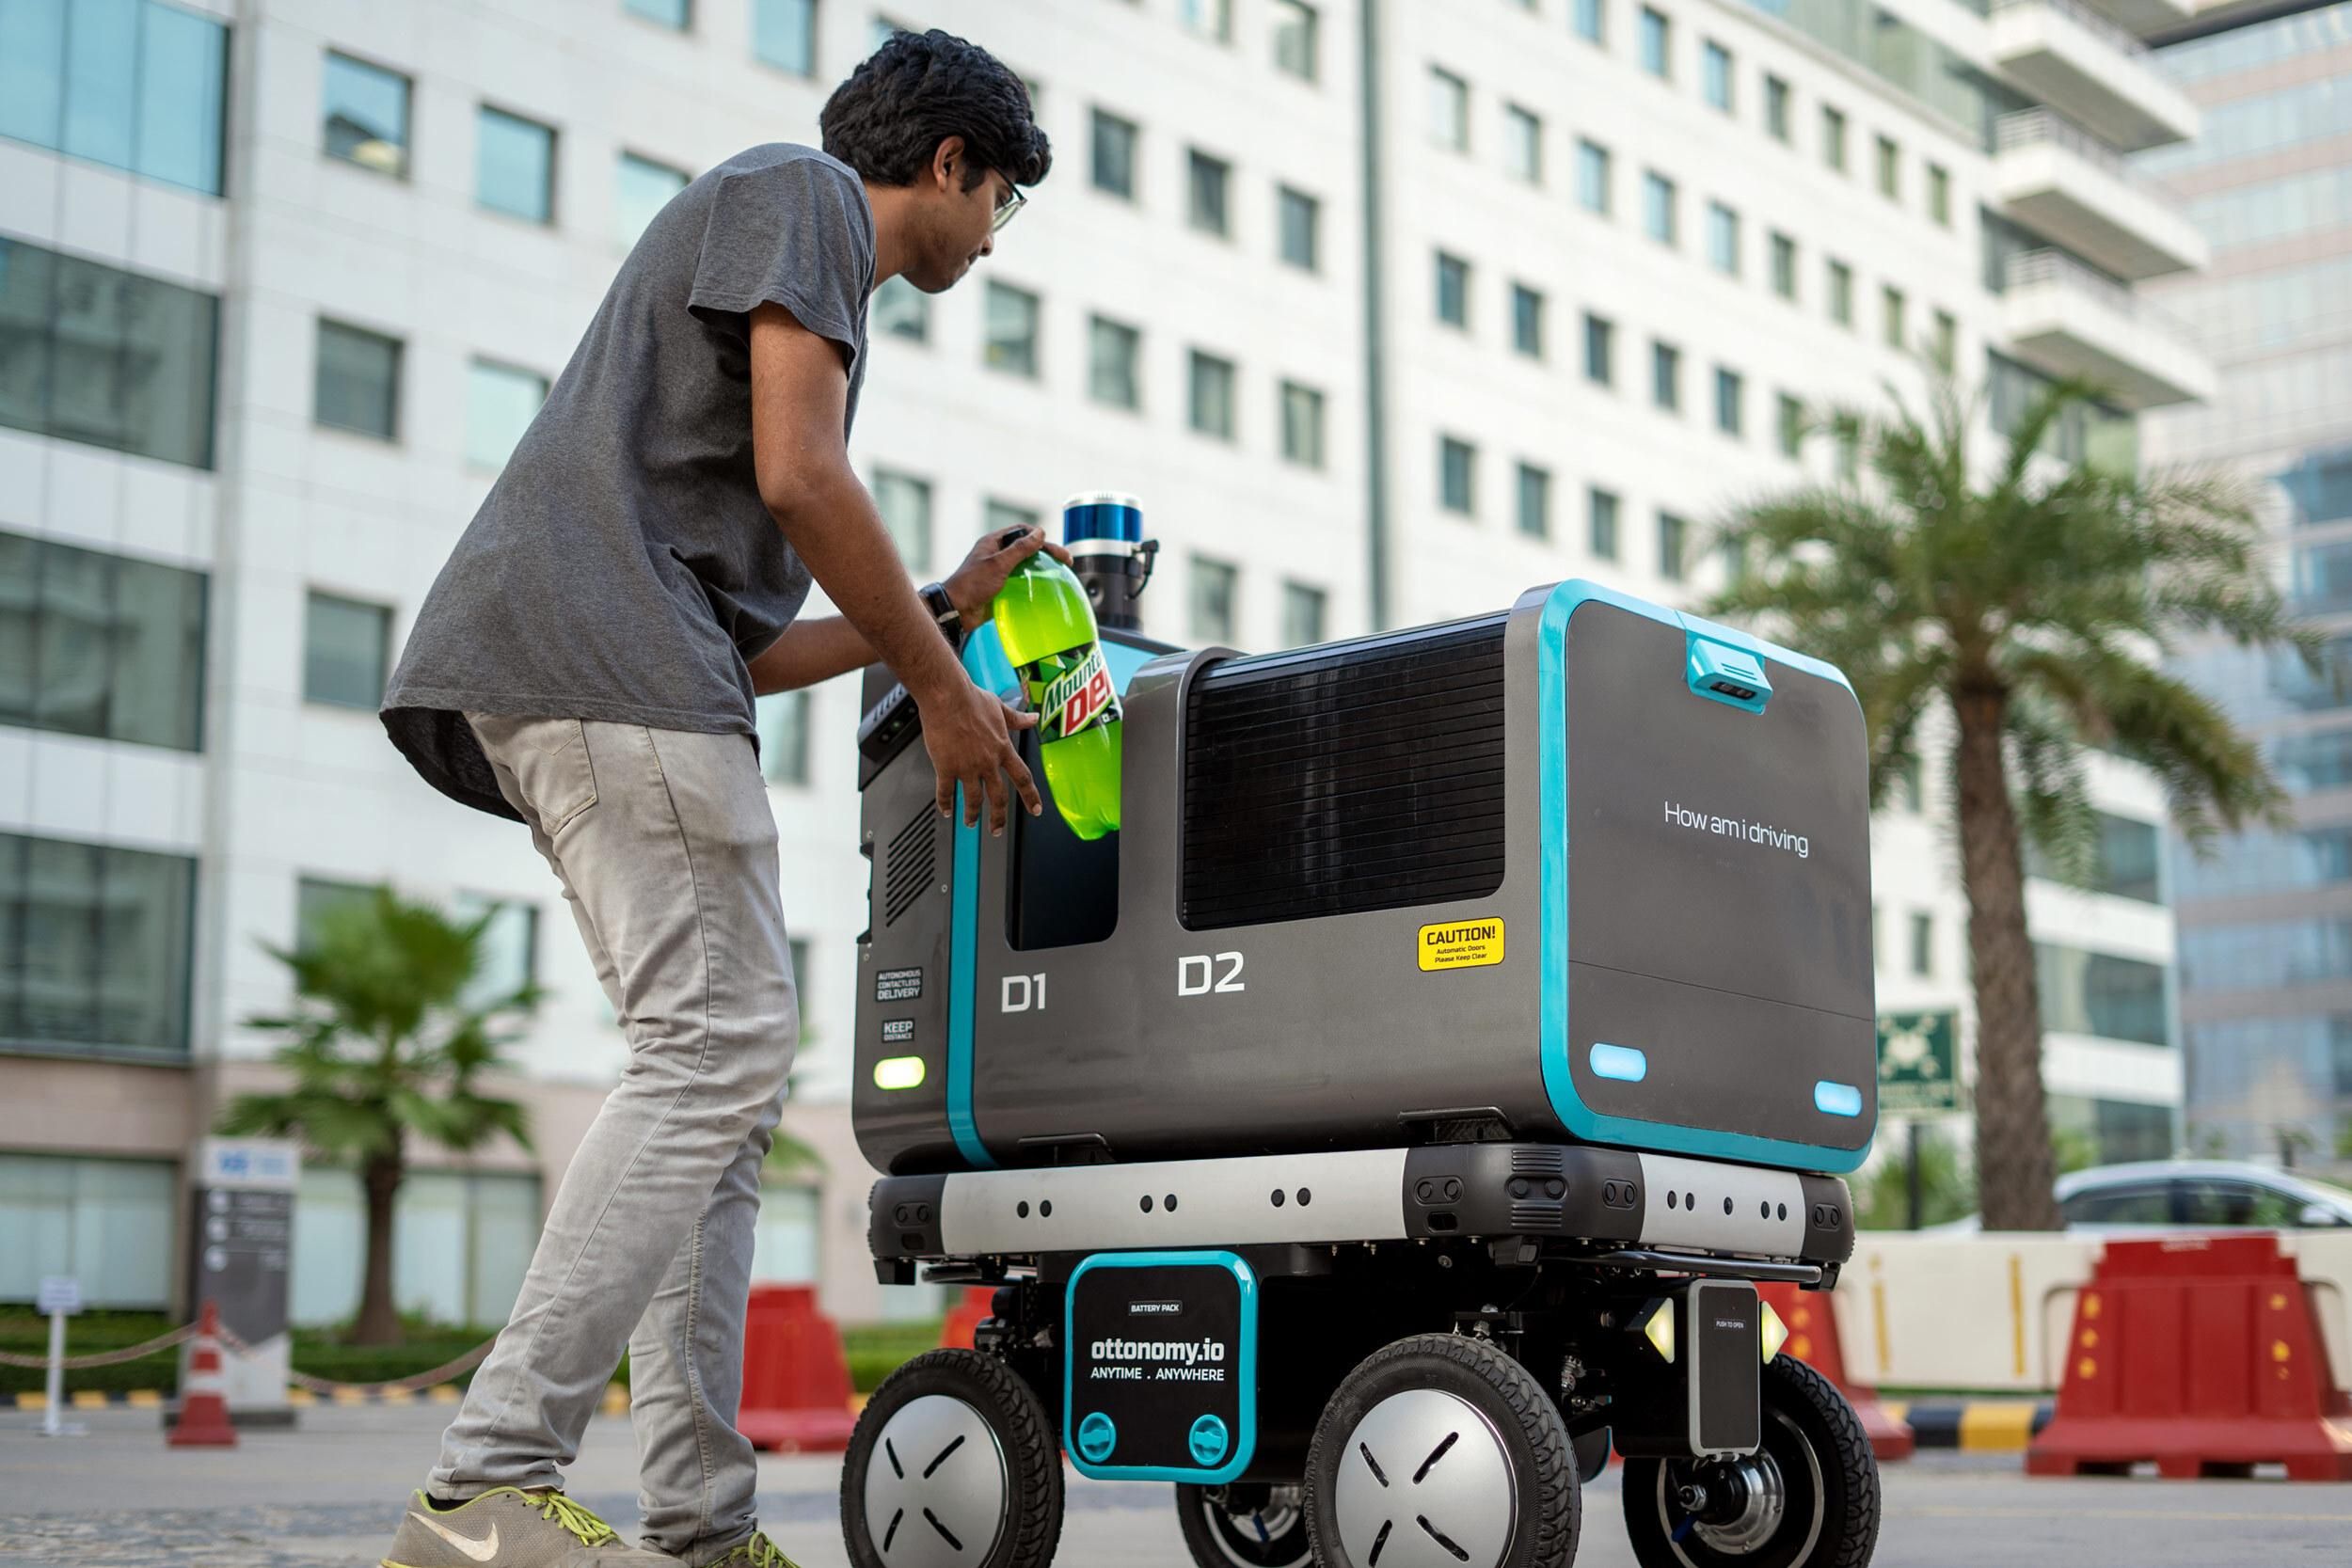 This Autonomous Robot Might Soon Make Food Deliveries in Airports